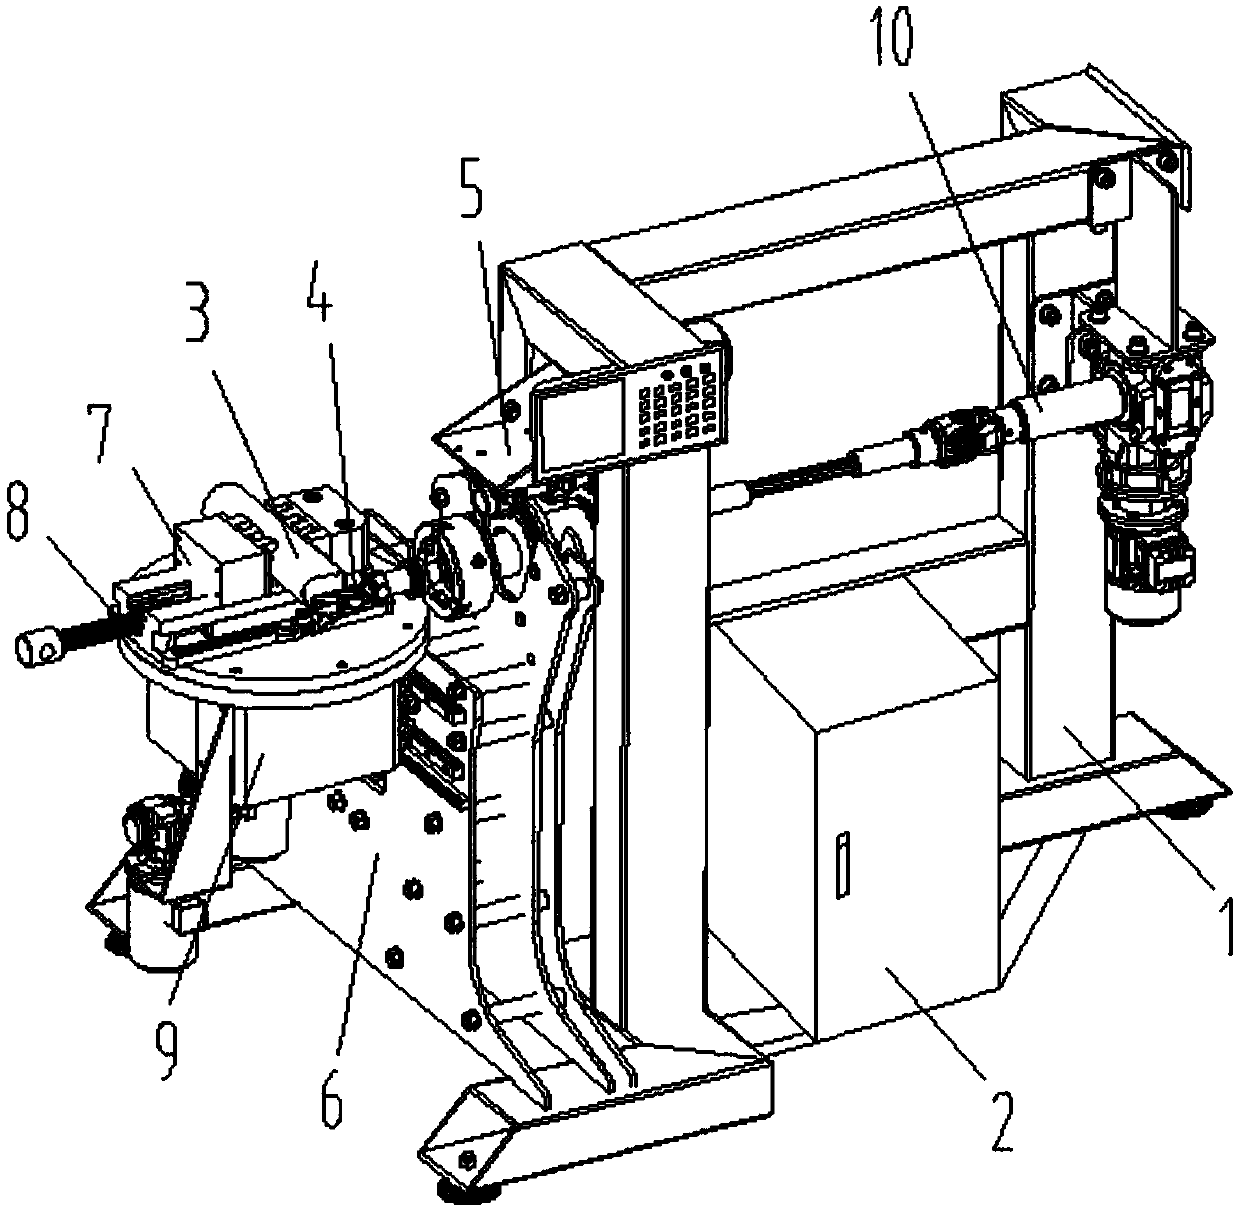 A multifunctional lathe with tool rotation